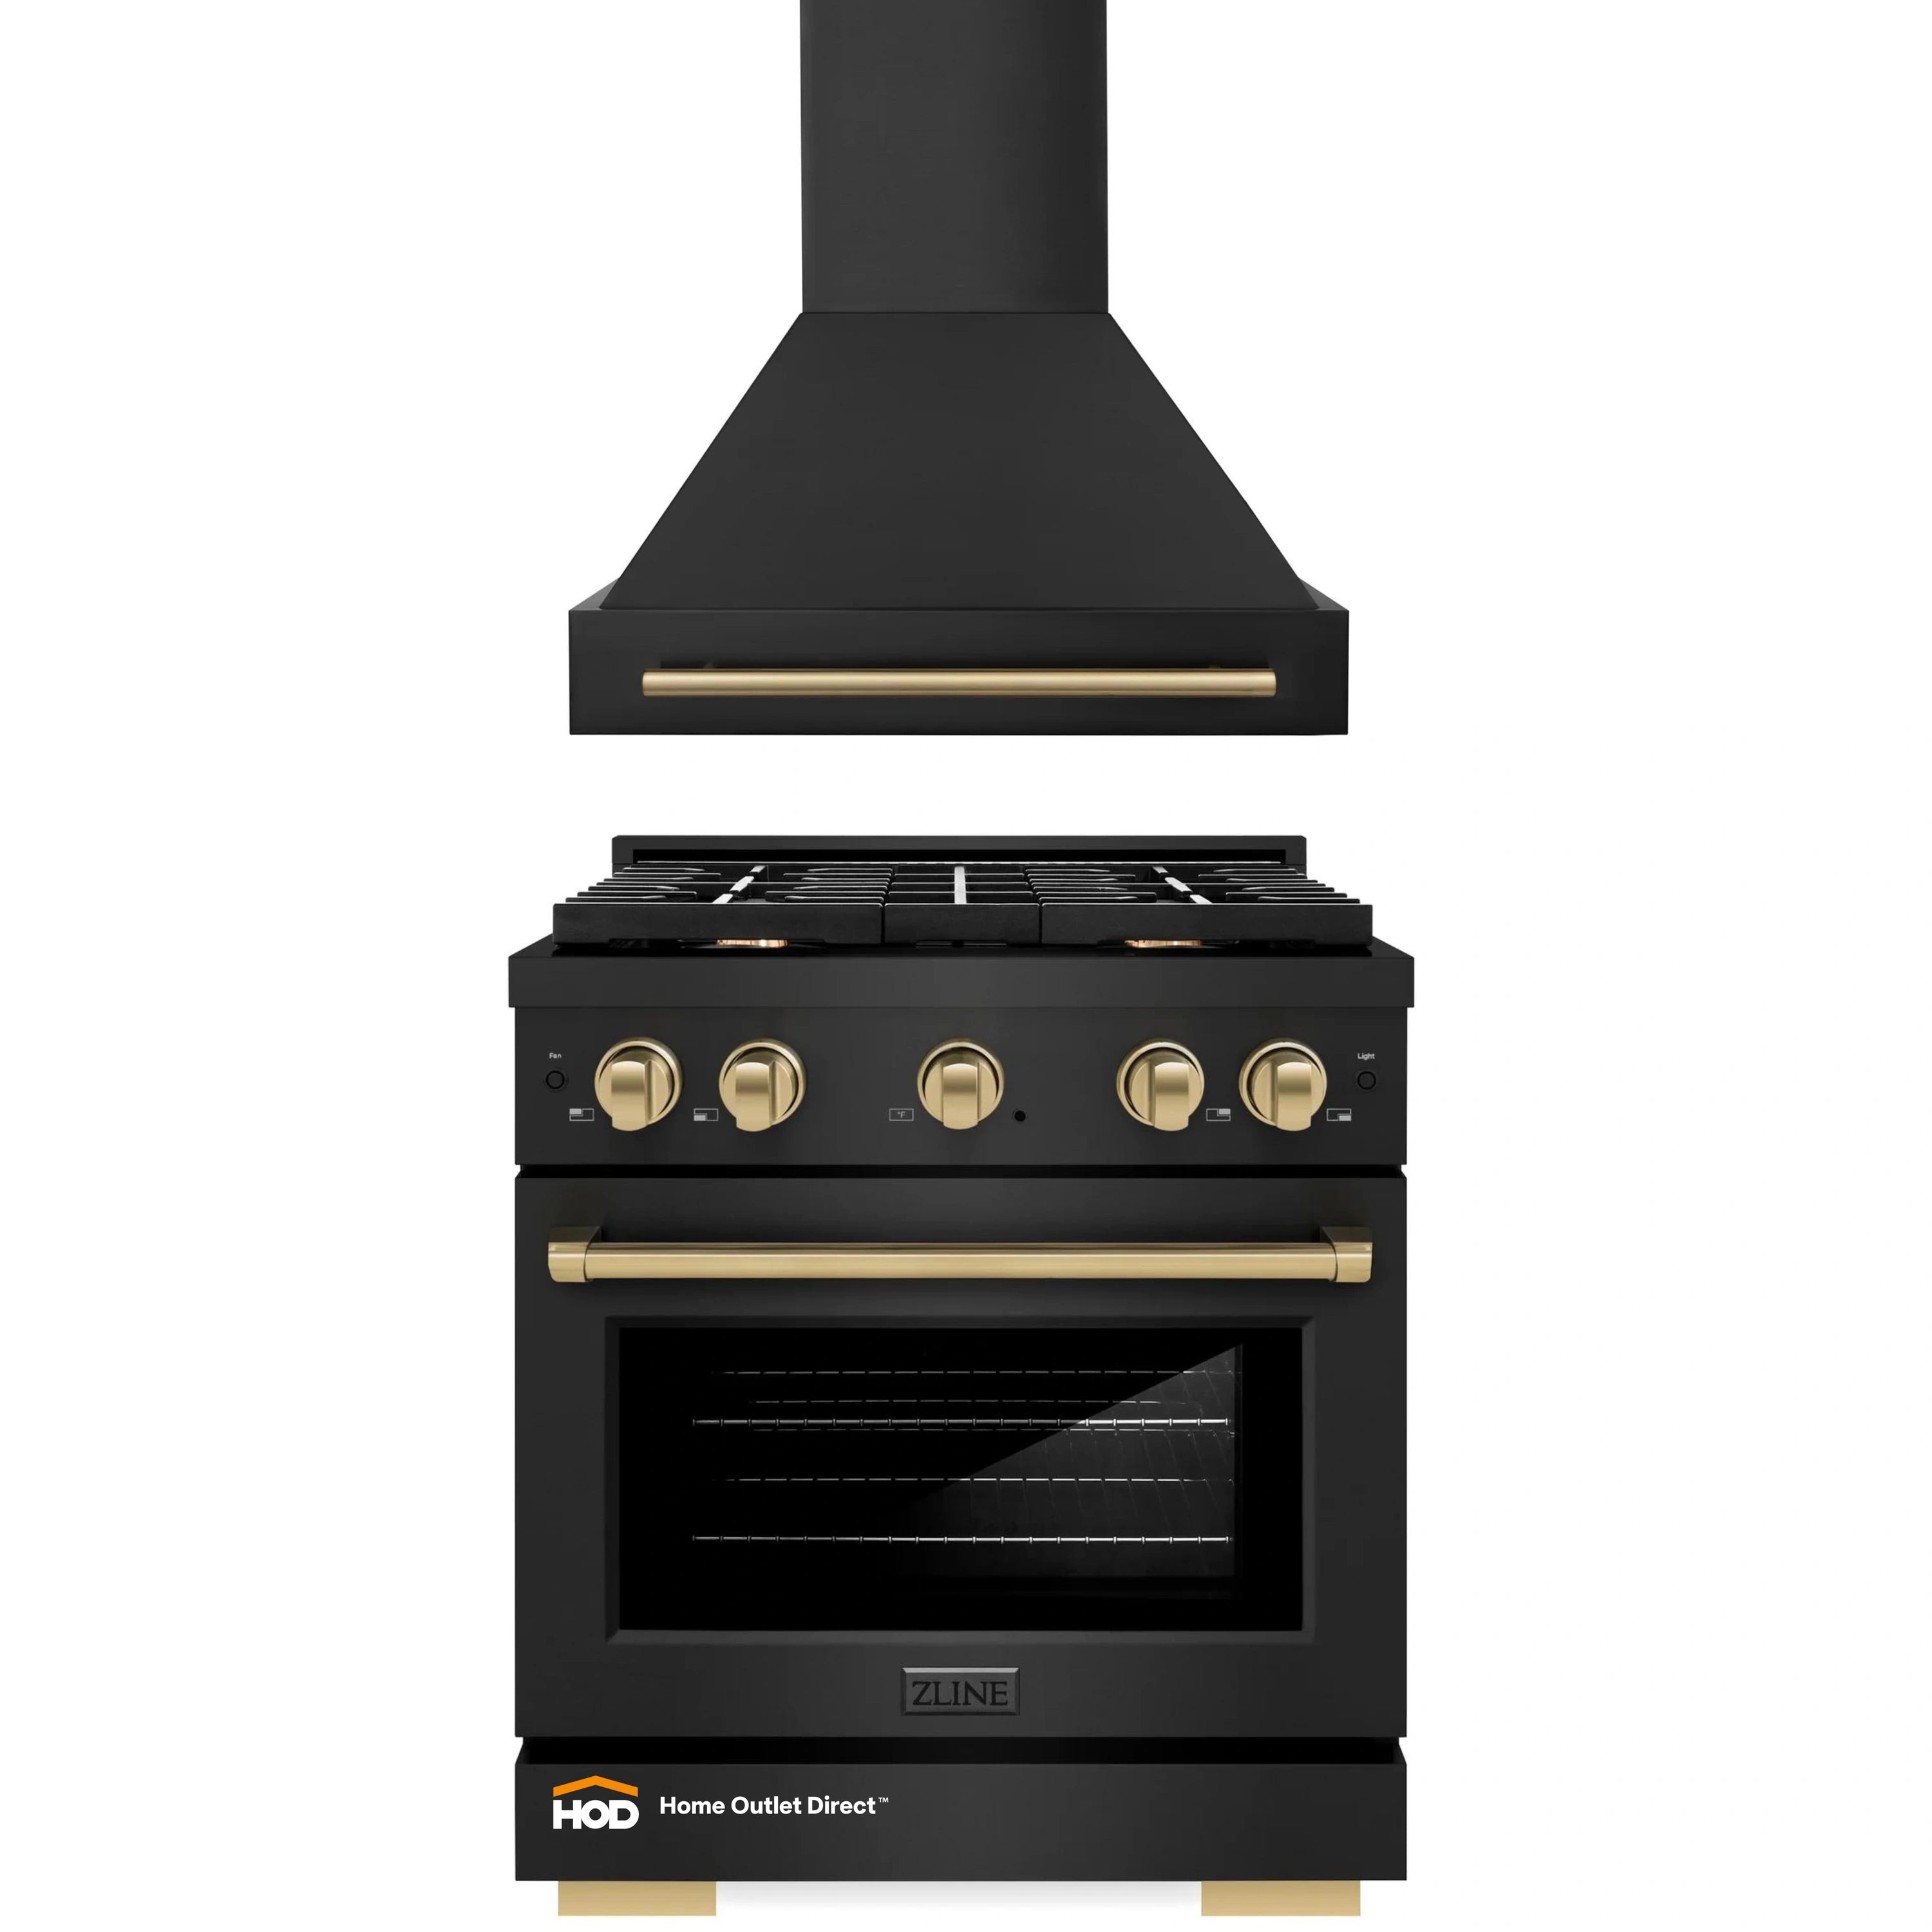 ZLINE Autograph Edition 2-Piece Appliance Package - 30-Inch Gas Range & Wall Mounted Range Hood in Black Stainless Steel with Champagne Bronze Trim (2AKP-RGBRH30-CB)